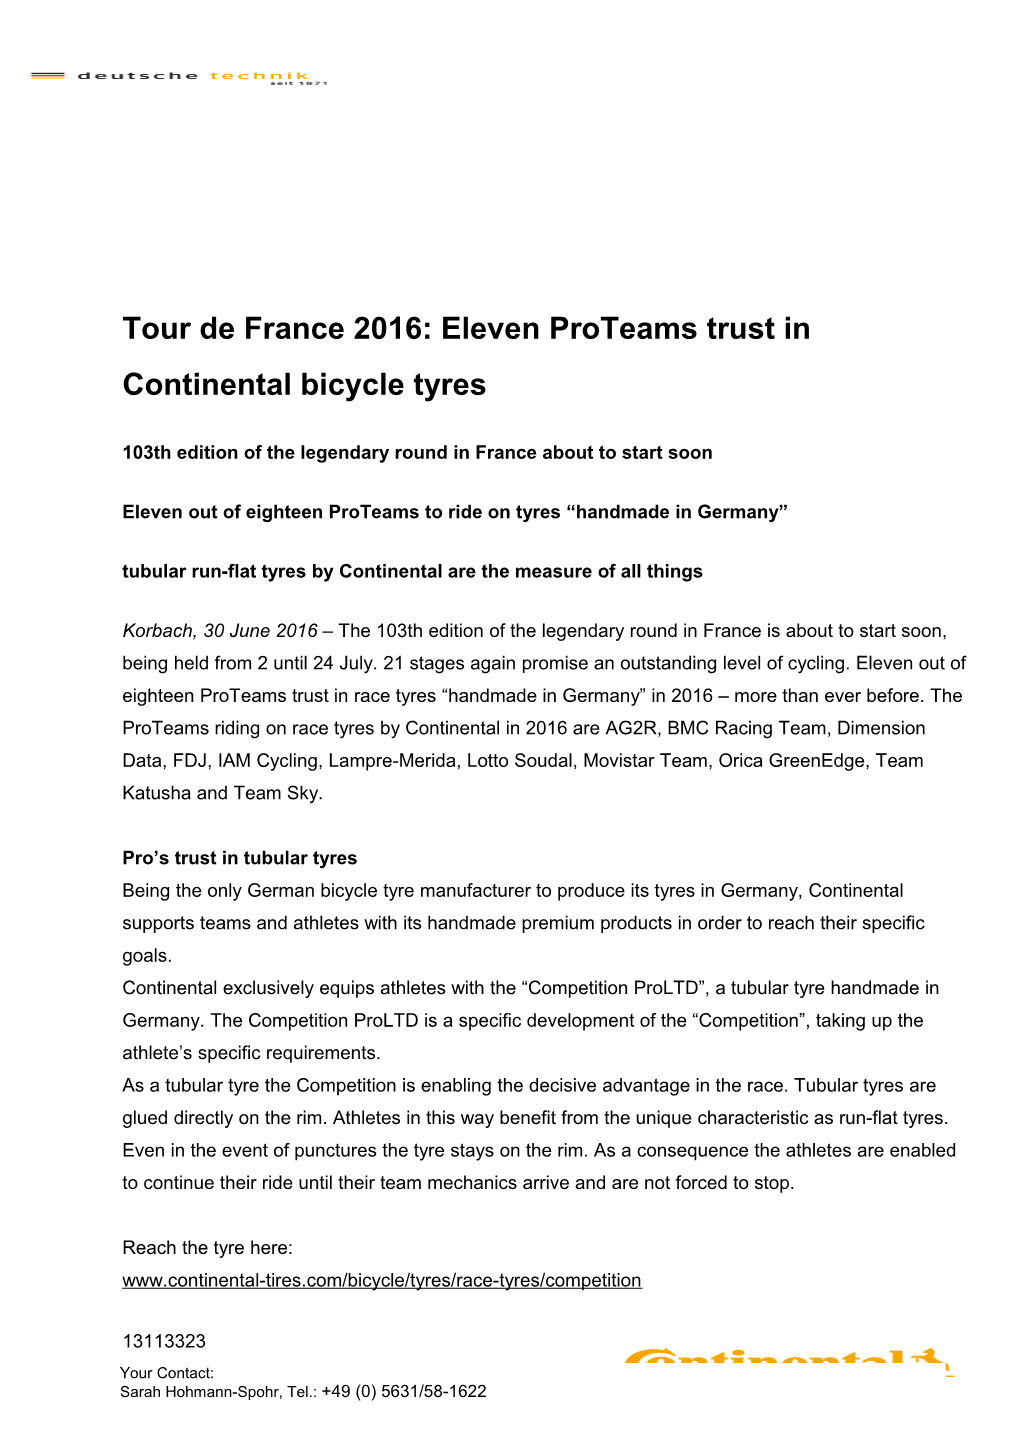 Tour De France 2016: Eleven Proteams Trust in Continental Bicycle Tyres